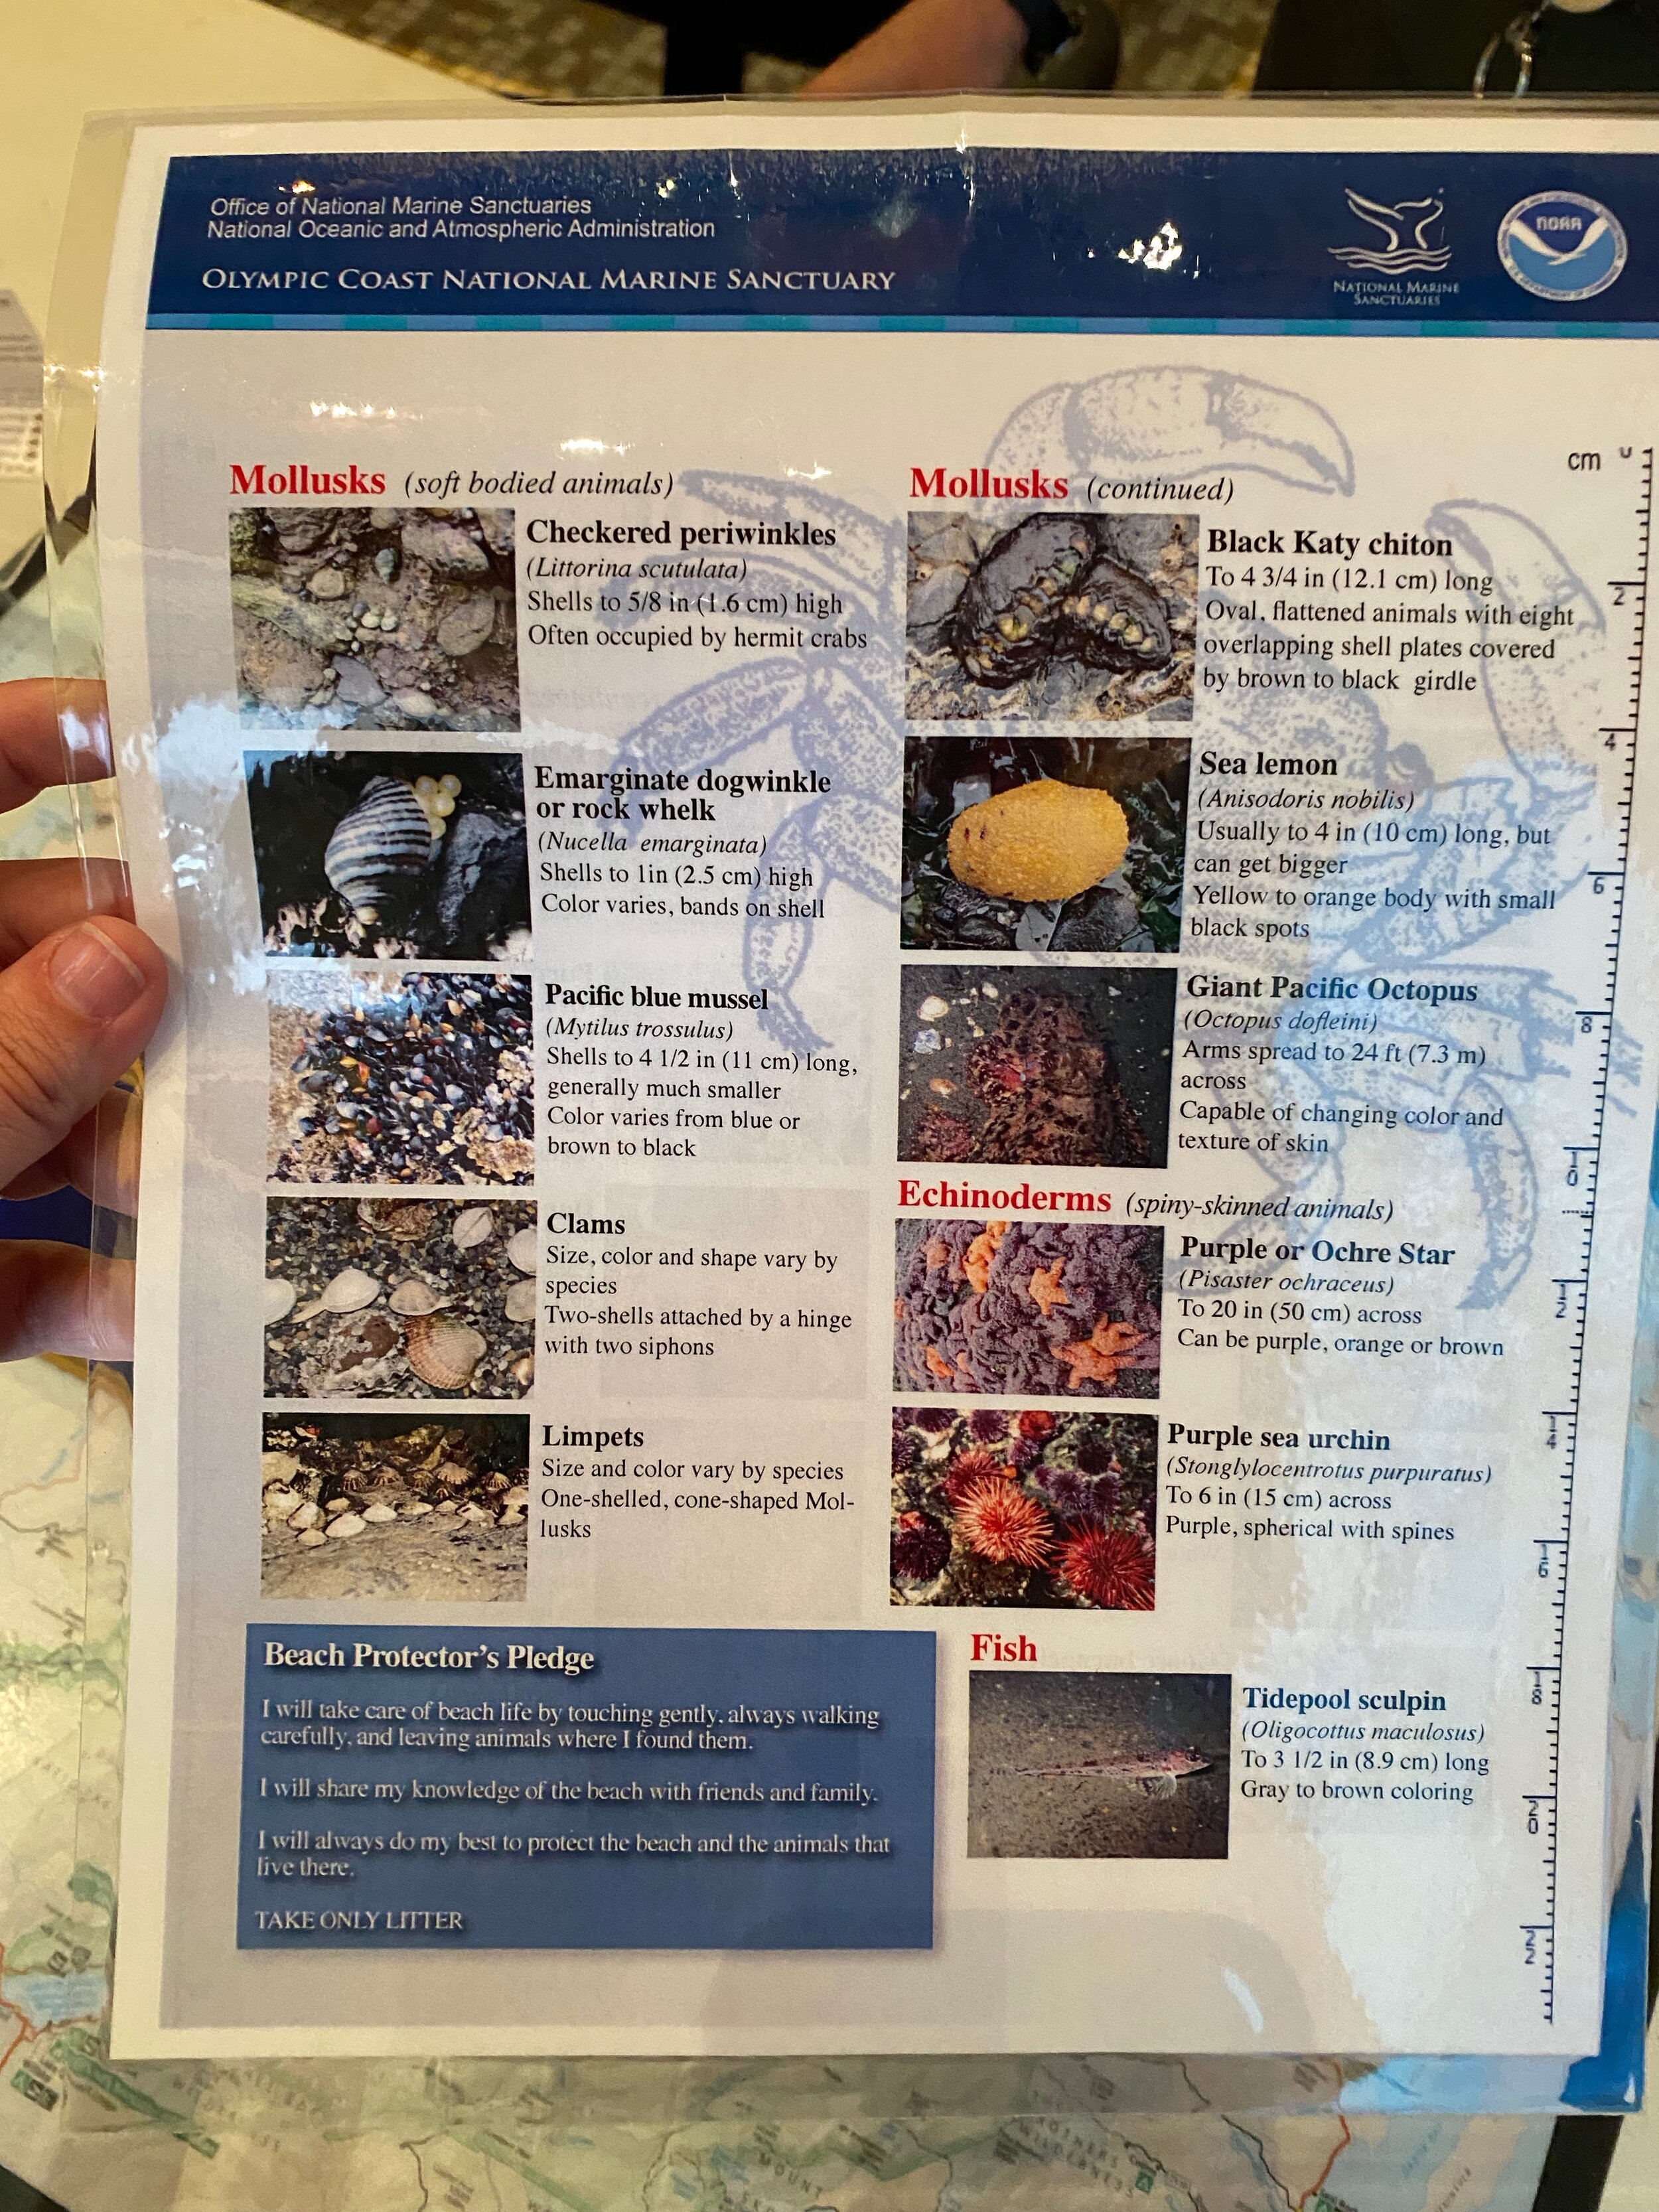 Ranger station guide to what you can see tide-pooling, page 2